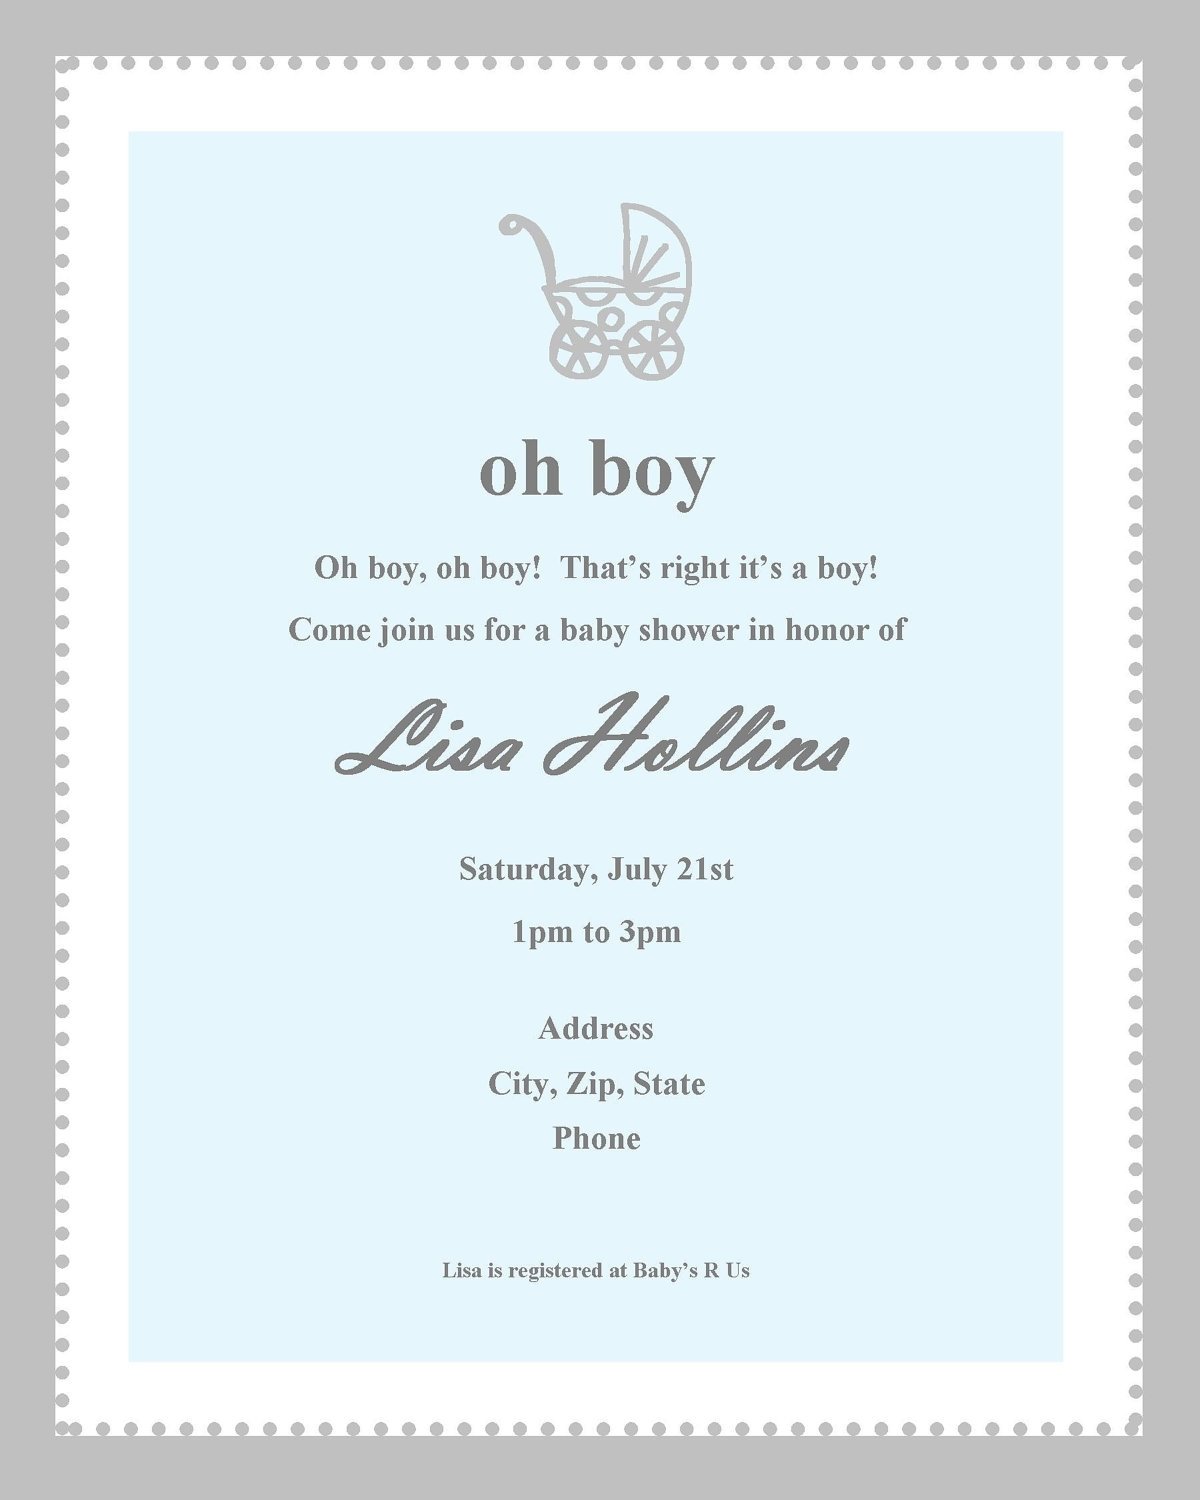 10 Lovable Boy Baby Shower Invitations Wording Ideas baby shower invitation wording ideas for a boy e280a2 baby showers ideas 2022